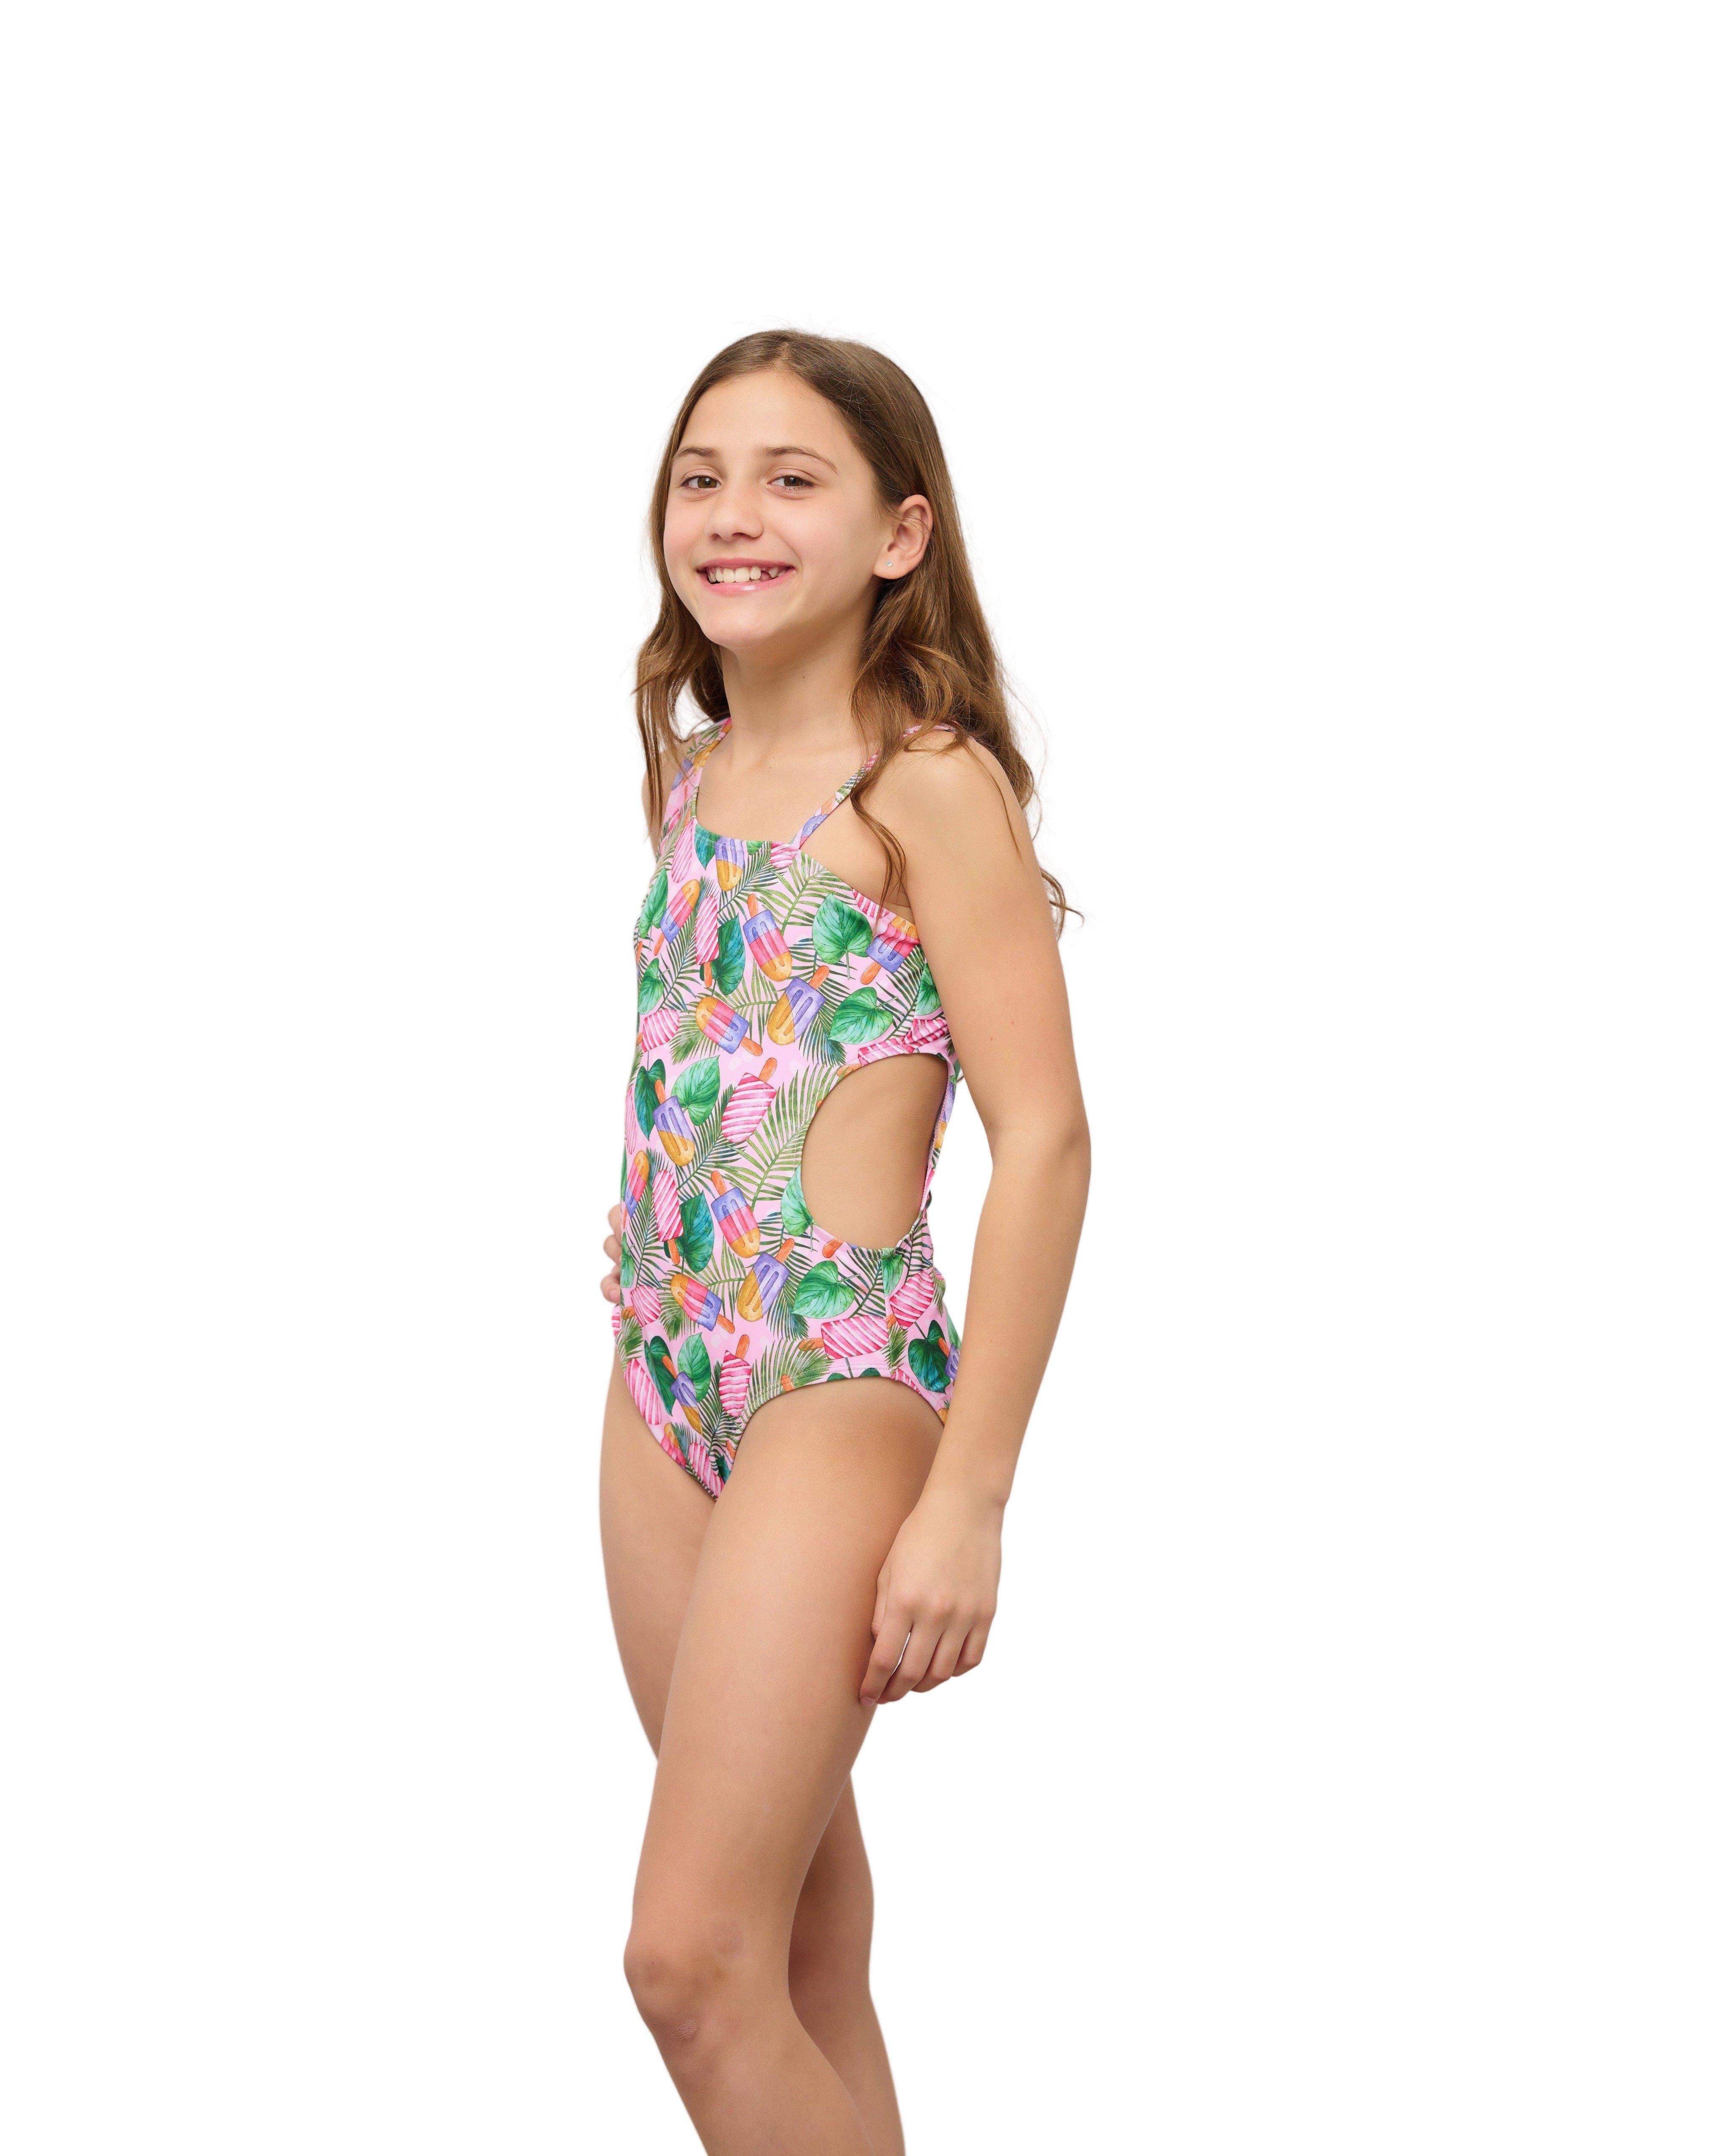 Little Girls Popsicle Party One Shoulder One Piece Swimsuit